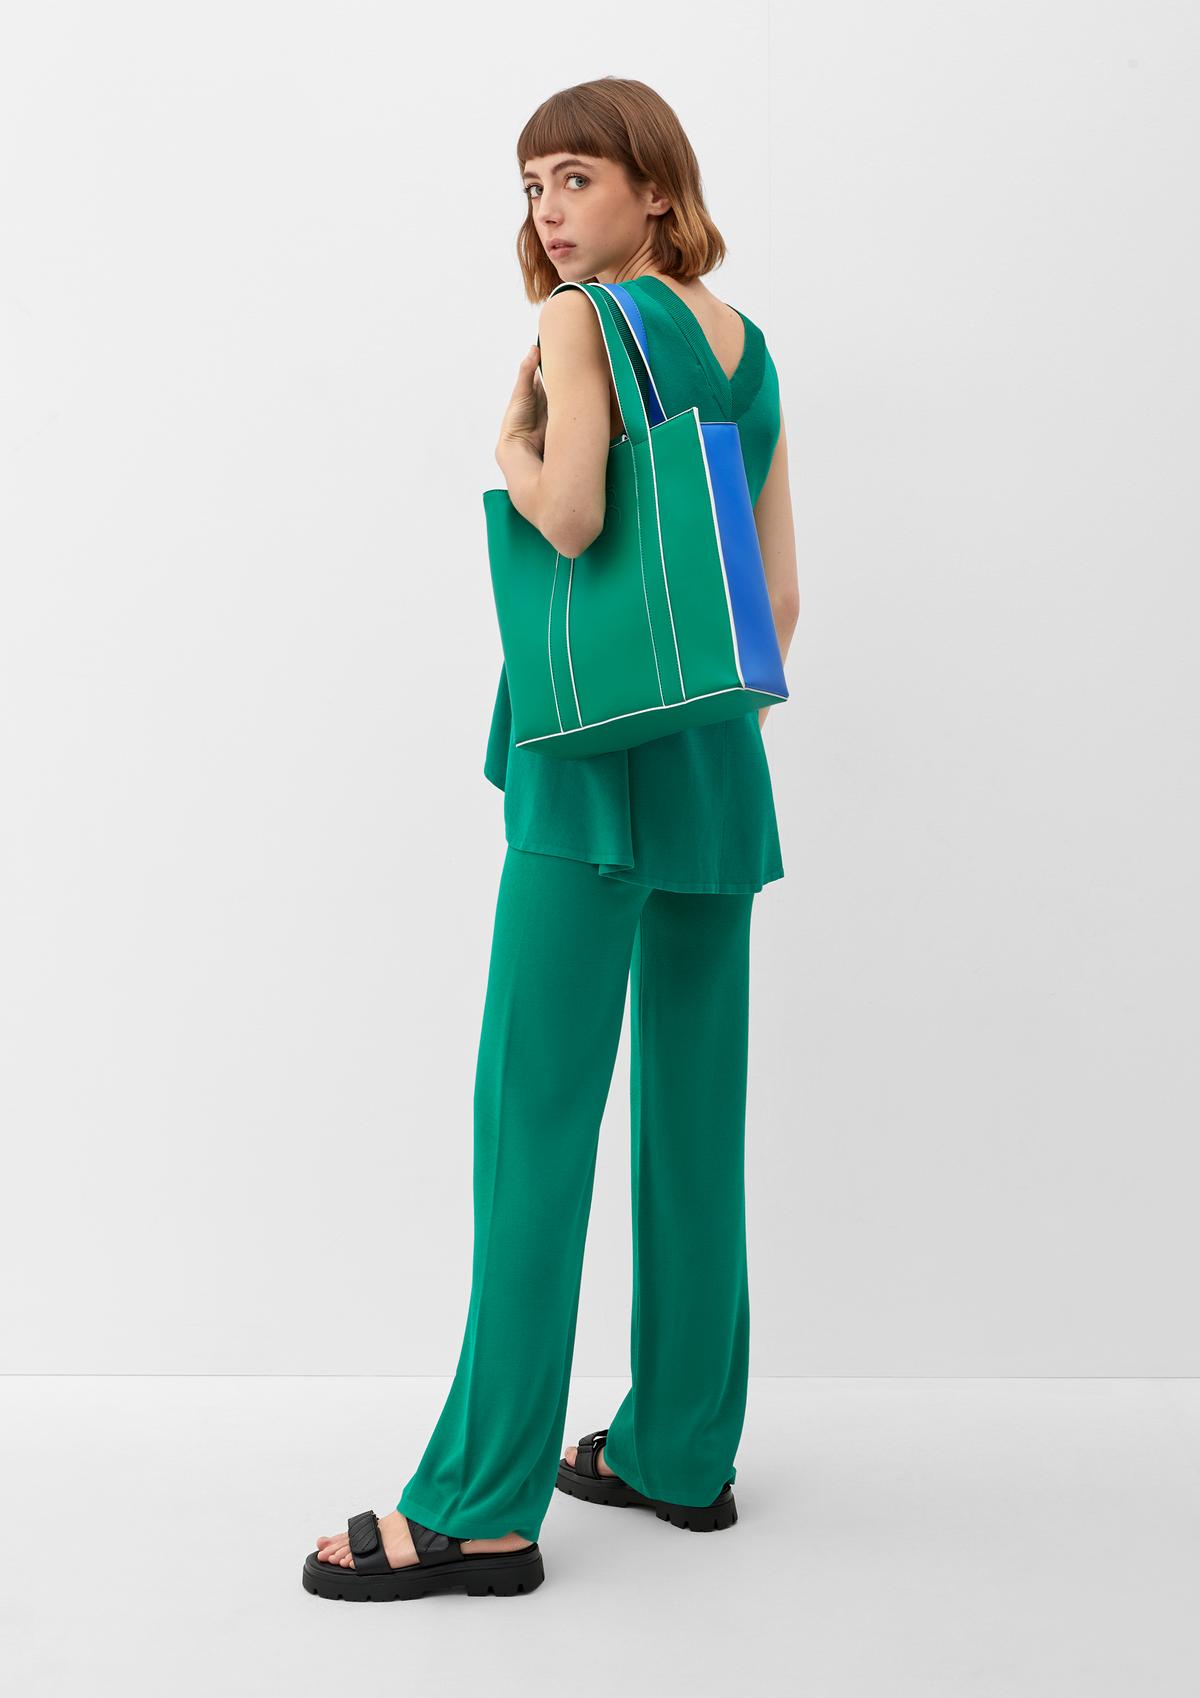 s.Oliver Shopper with colour blocking